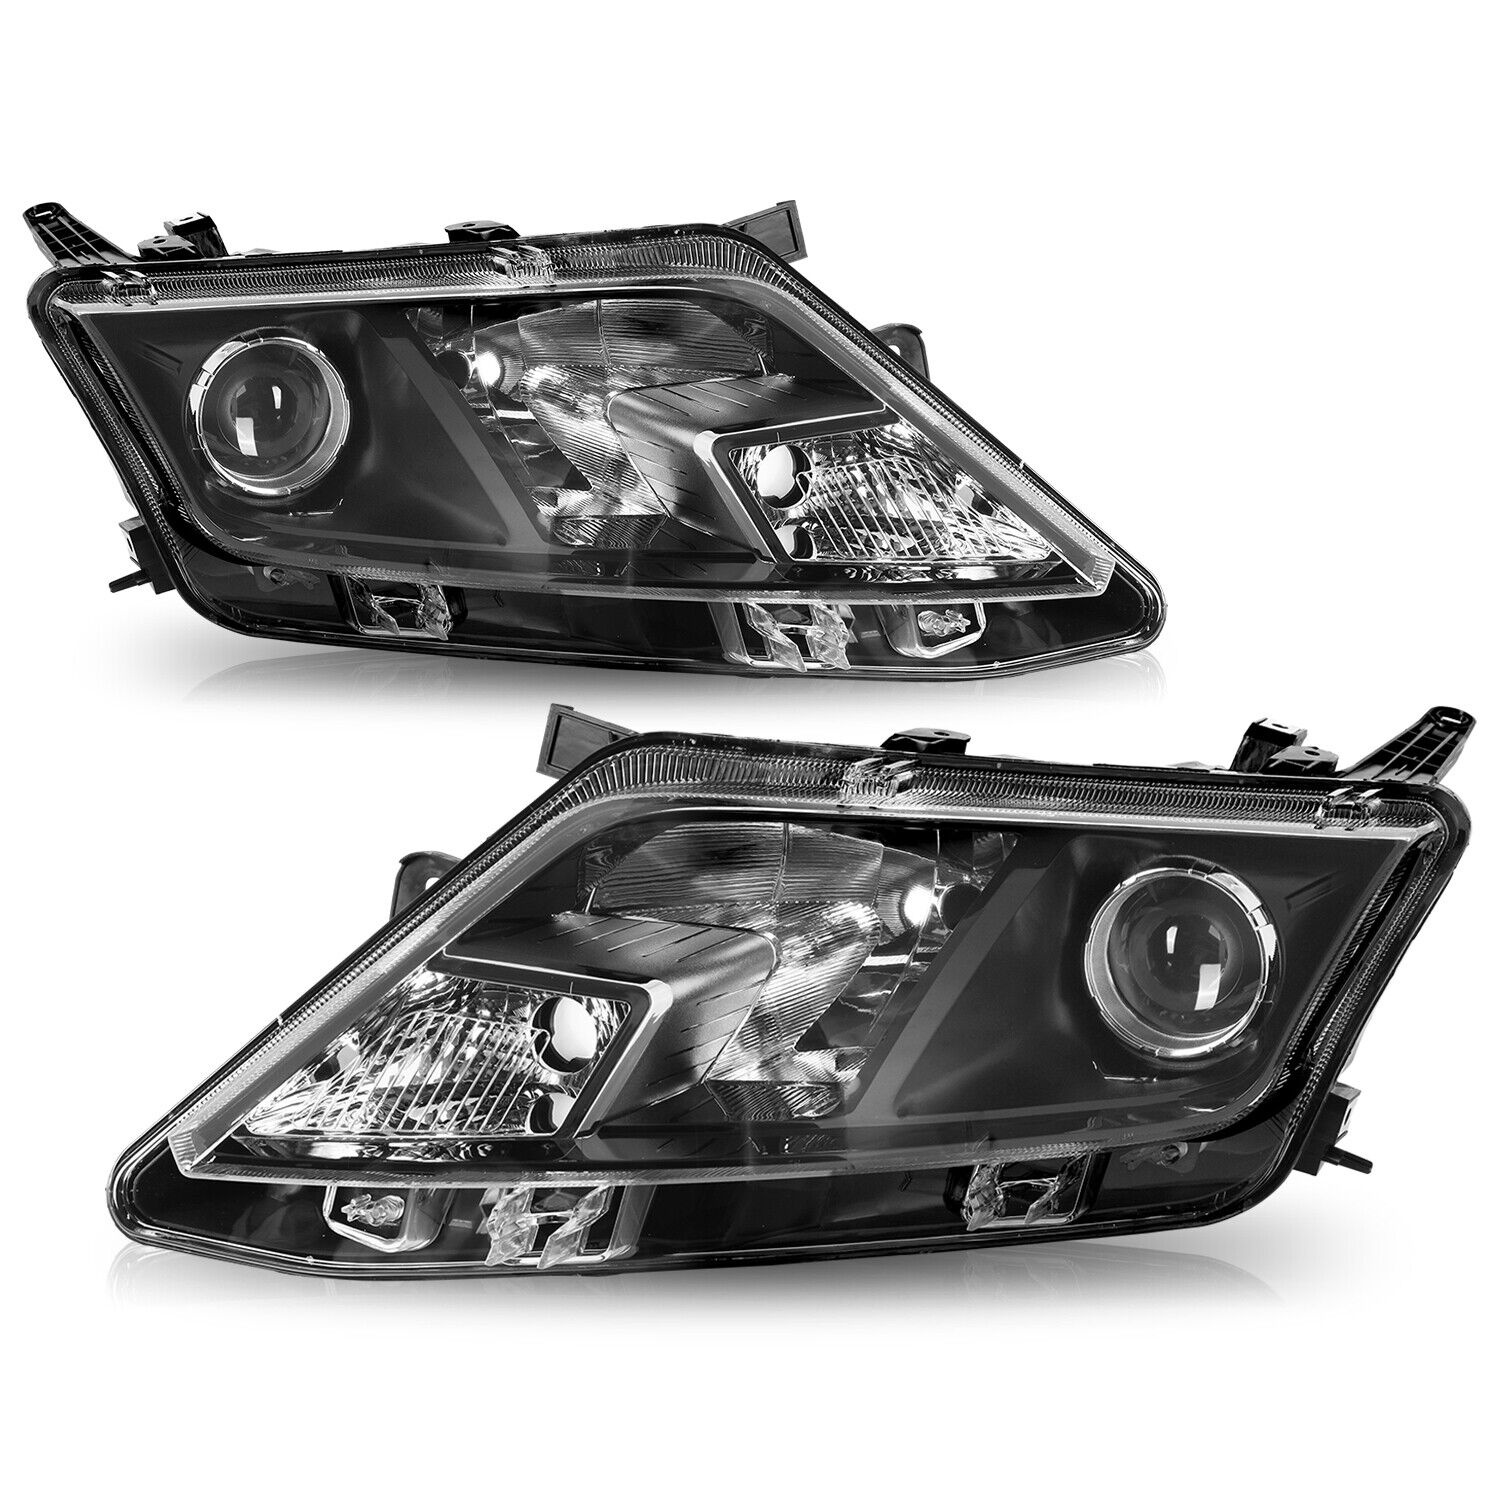 For 2010 2011 2012 Ford Fusion Headlights Halogen Headlamps Pair Left+Right